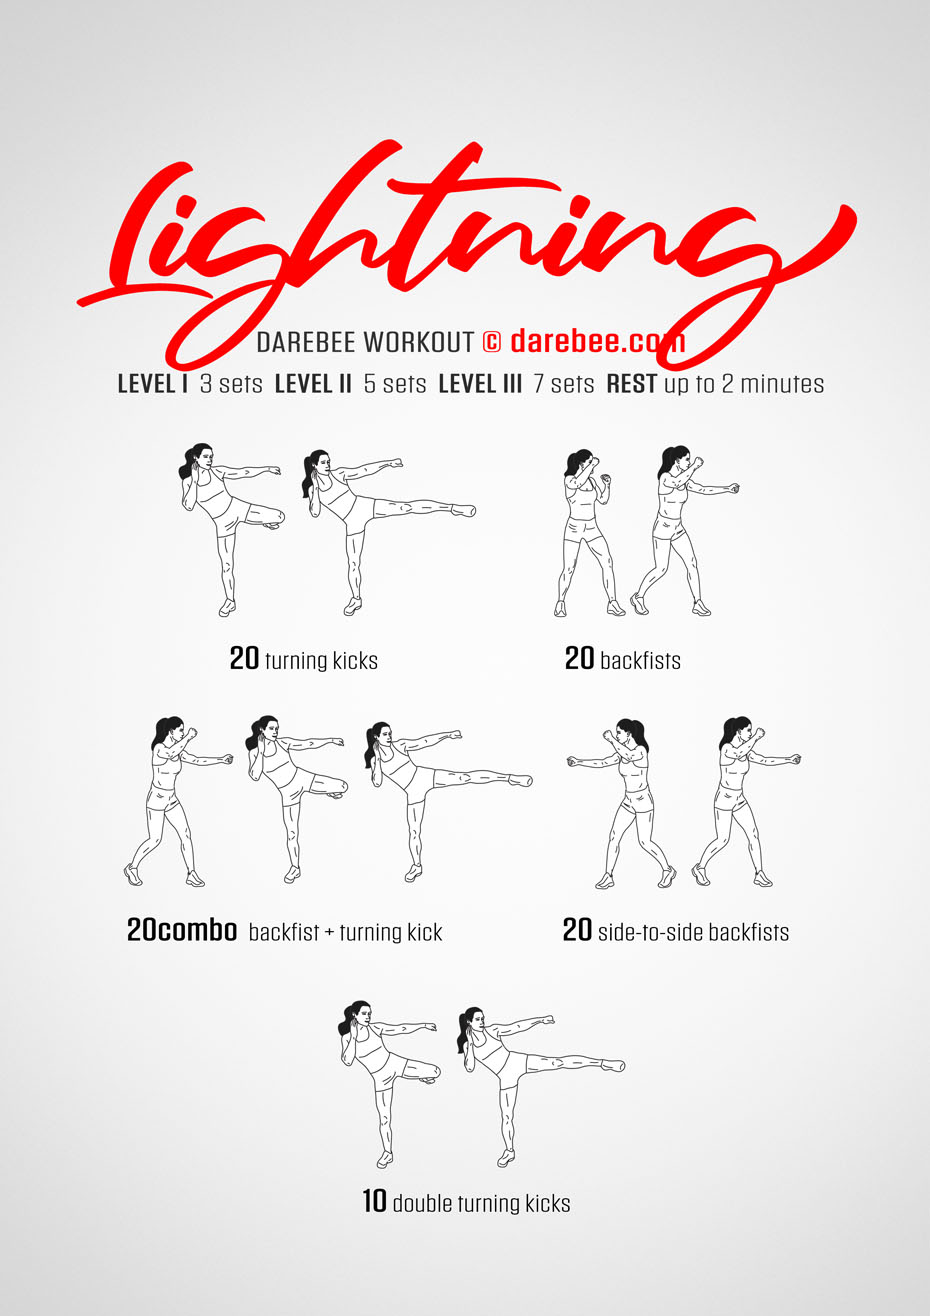 Lightning is a Darebee home fitness combat-moves based workout